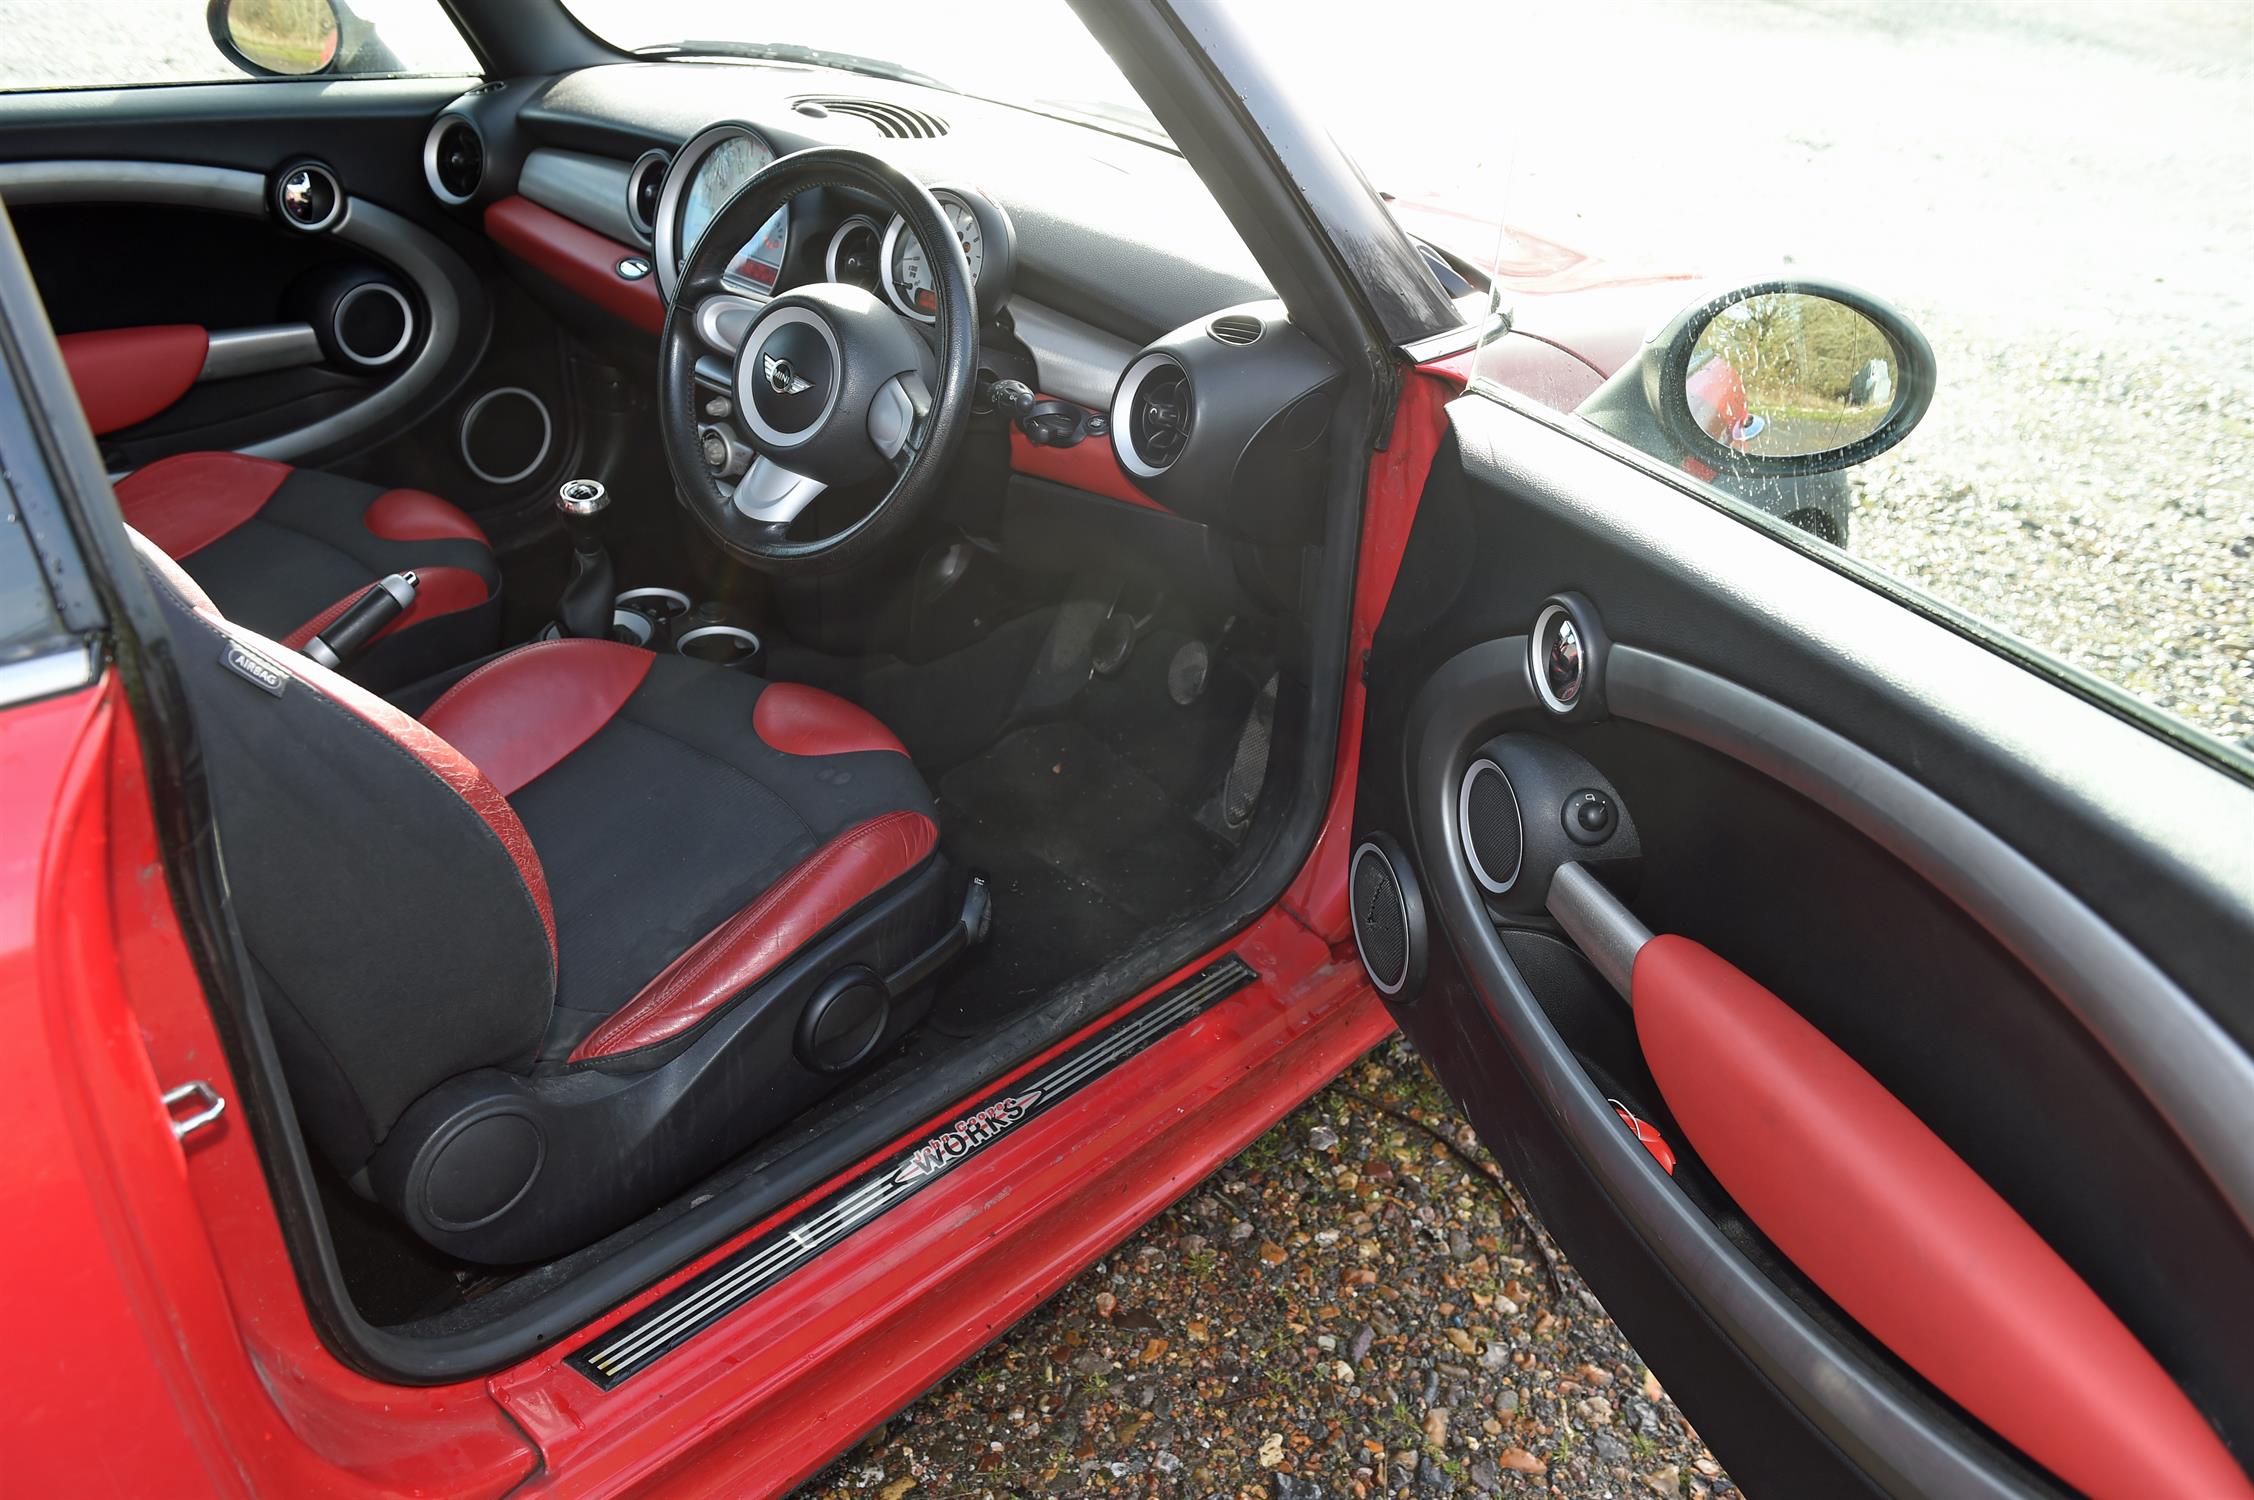 2007 Mini 1.6 Cooper Petrol with John Cooper Works Areo Body Kit. Registration number: SP57 GHH. - Image 6 of 14